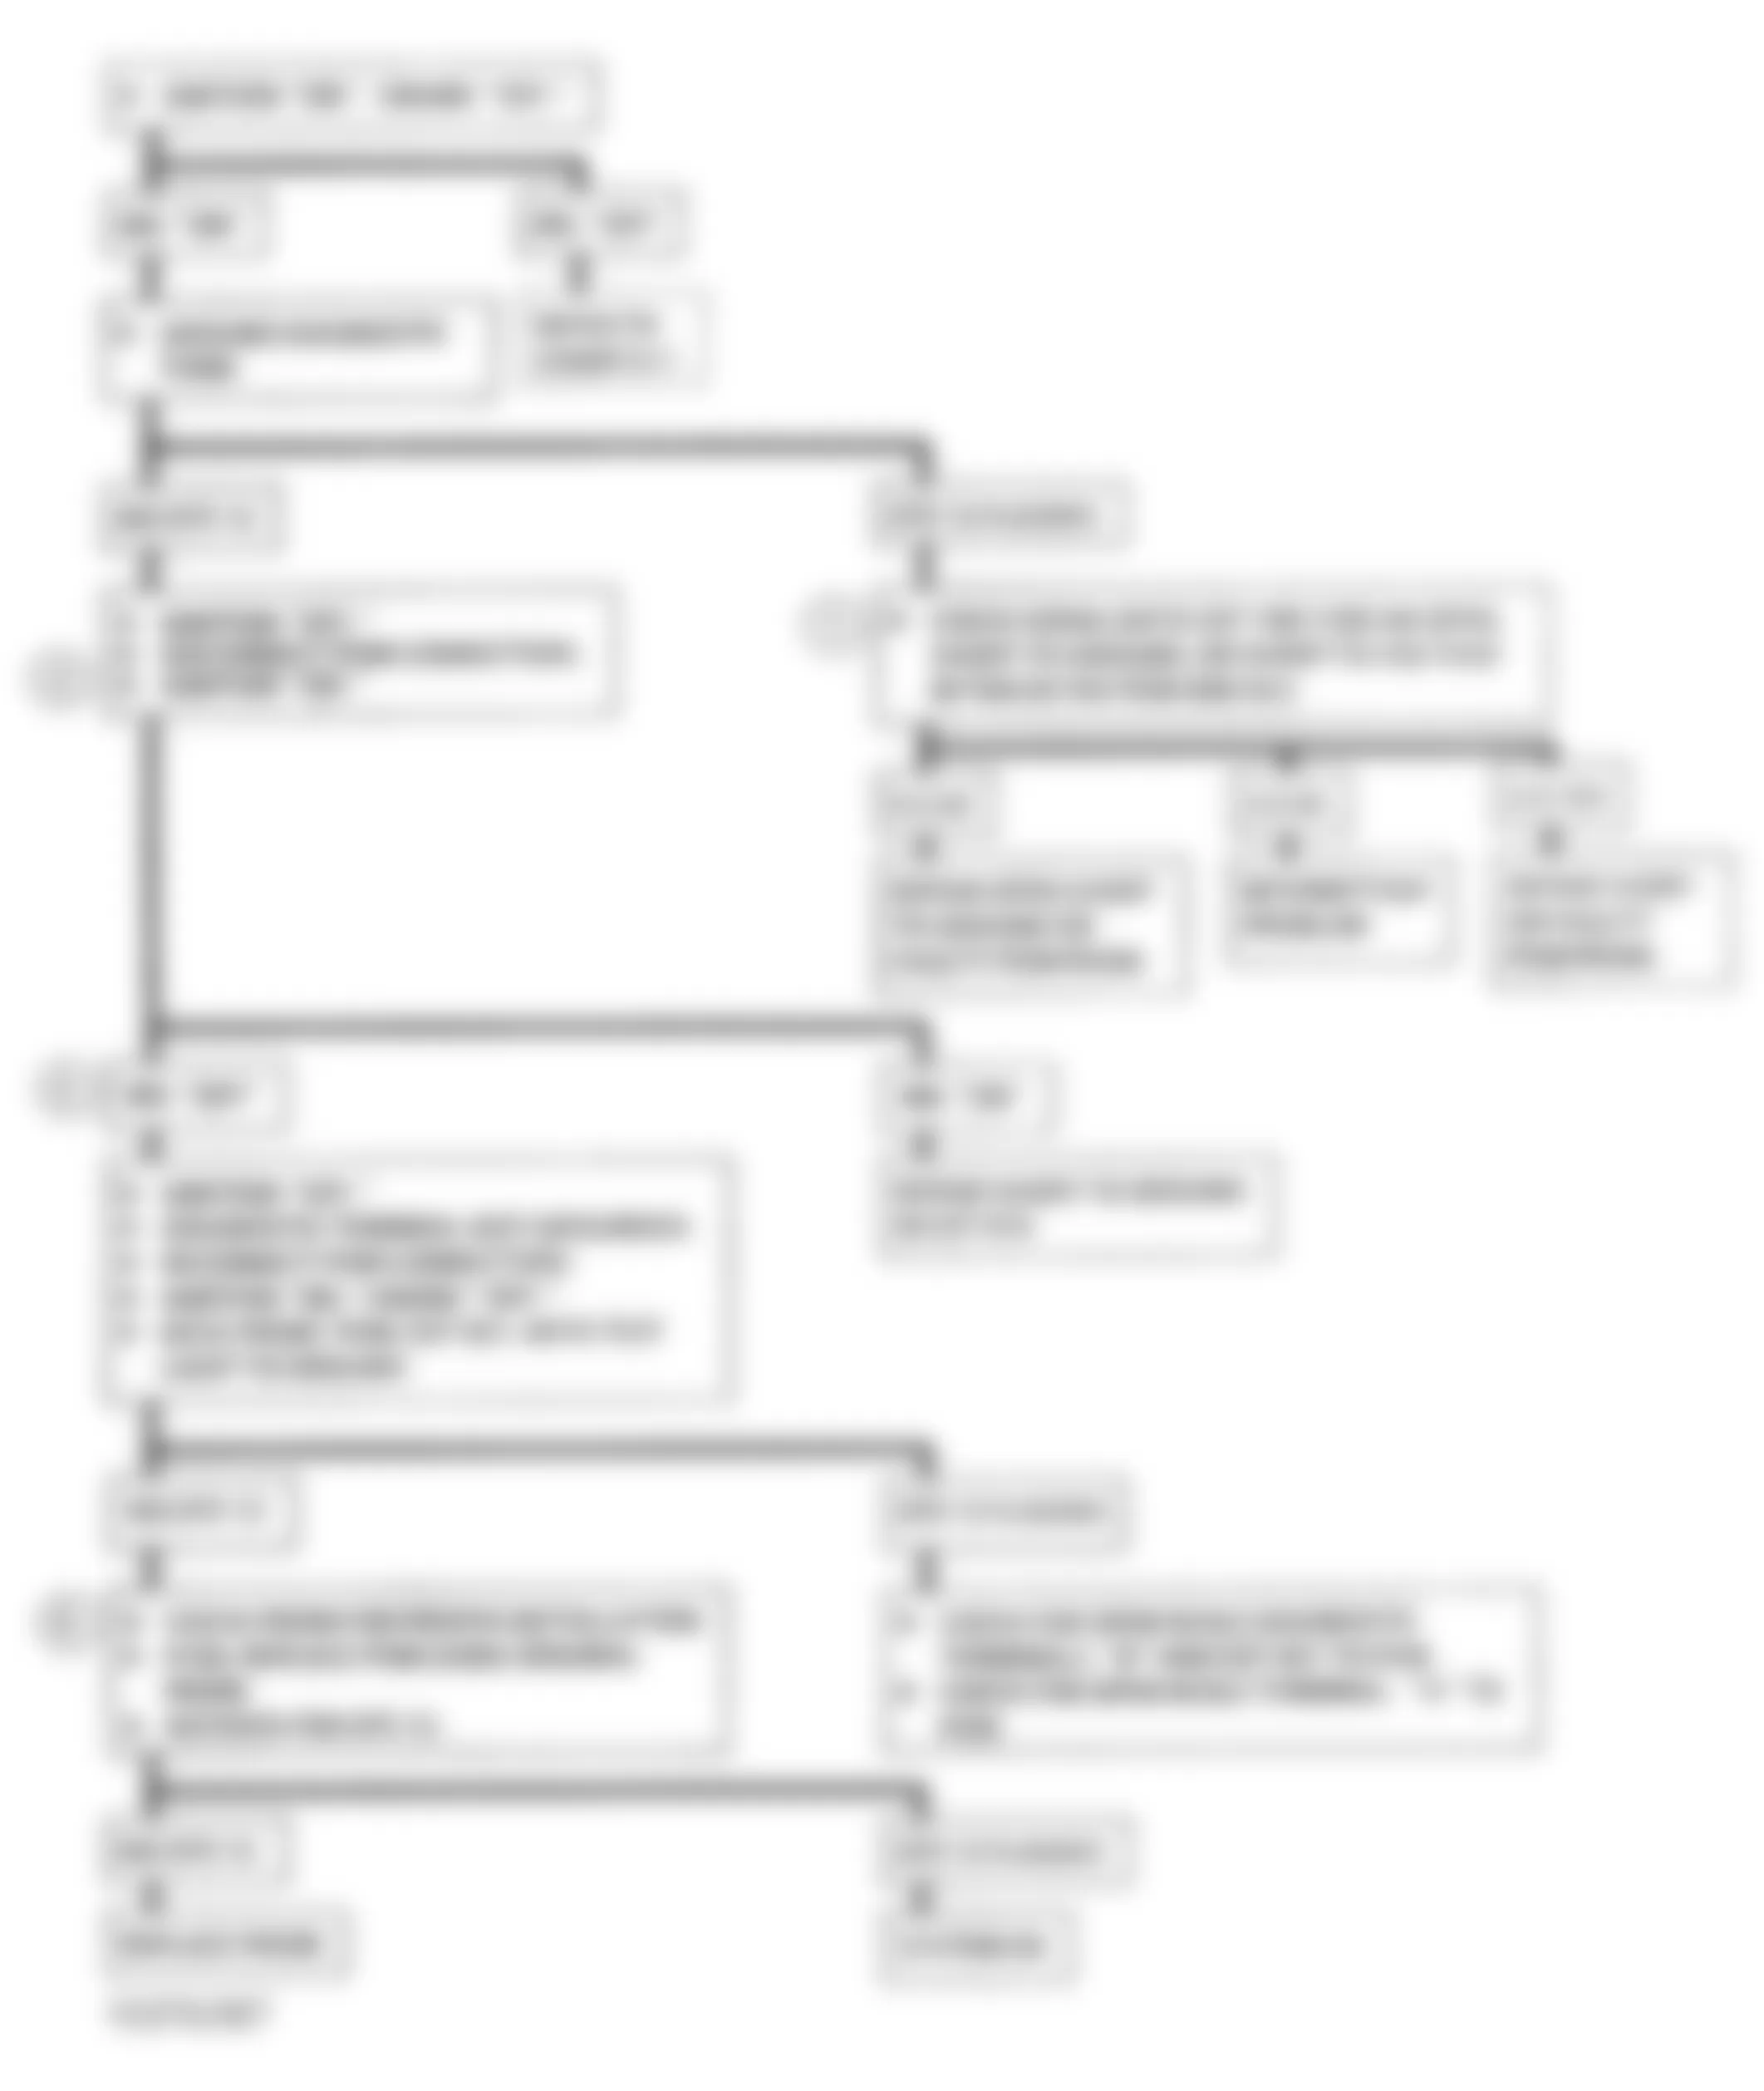 Chevrolet Suburban C2500 1993 - Component Locations -  A-2, Flowchart, No DLC Data, MIL On All Time - A/T